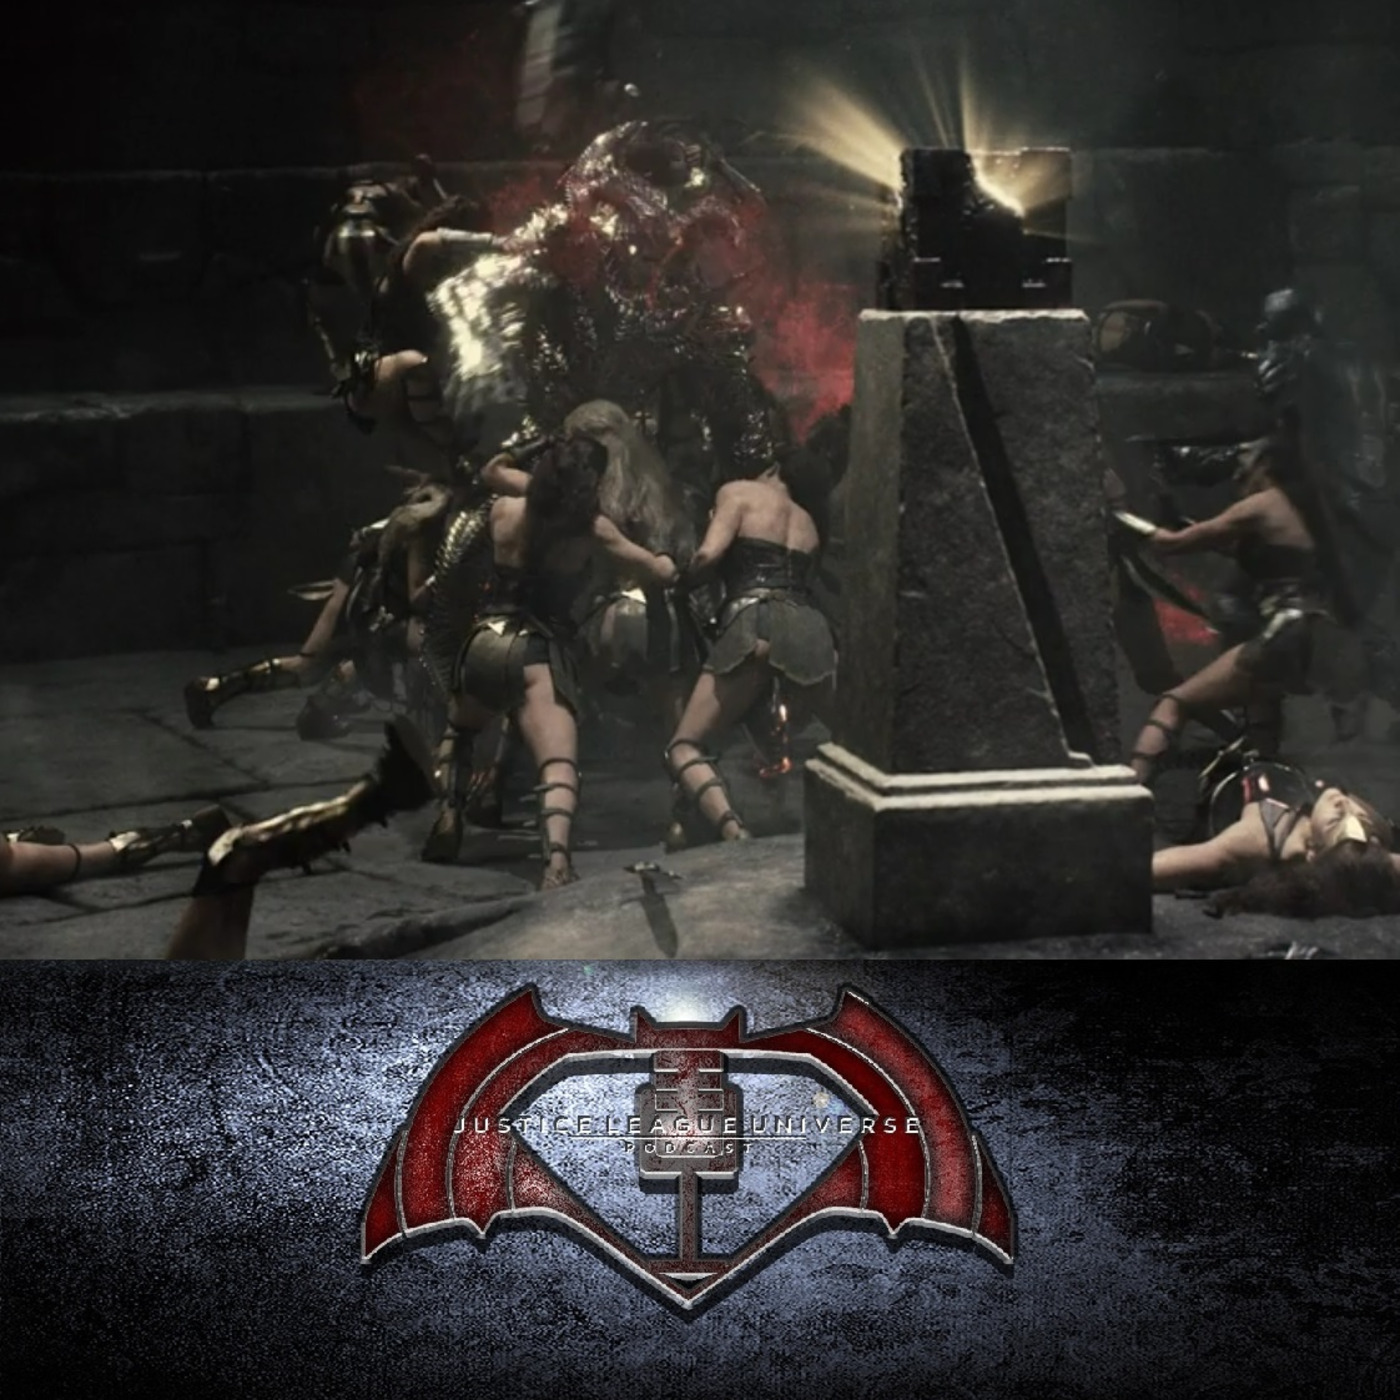 Episode 172: Zack Snyder’s Justice League - Part 1 Ep 4 - Steppenwolf Arrives